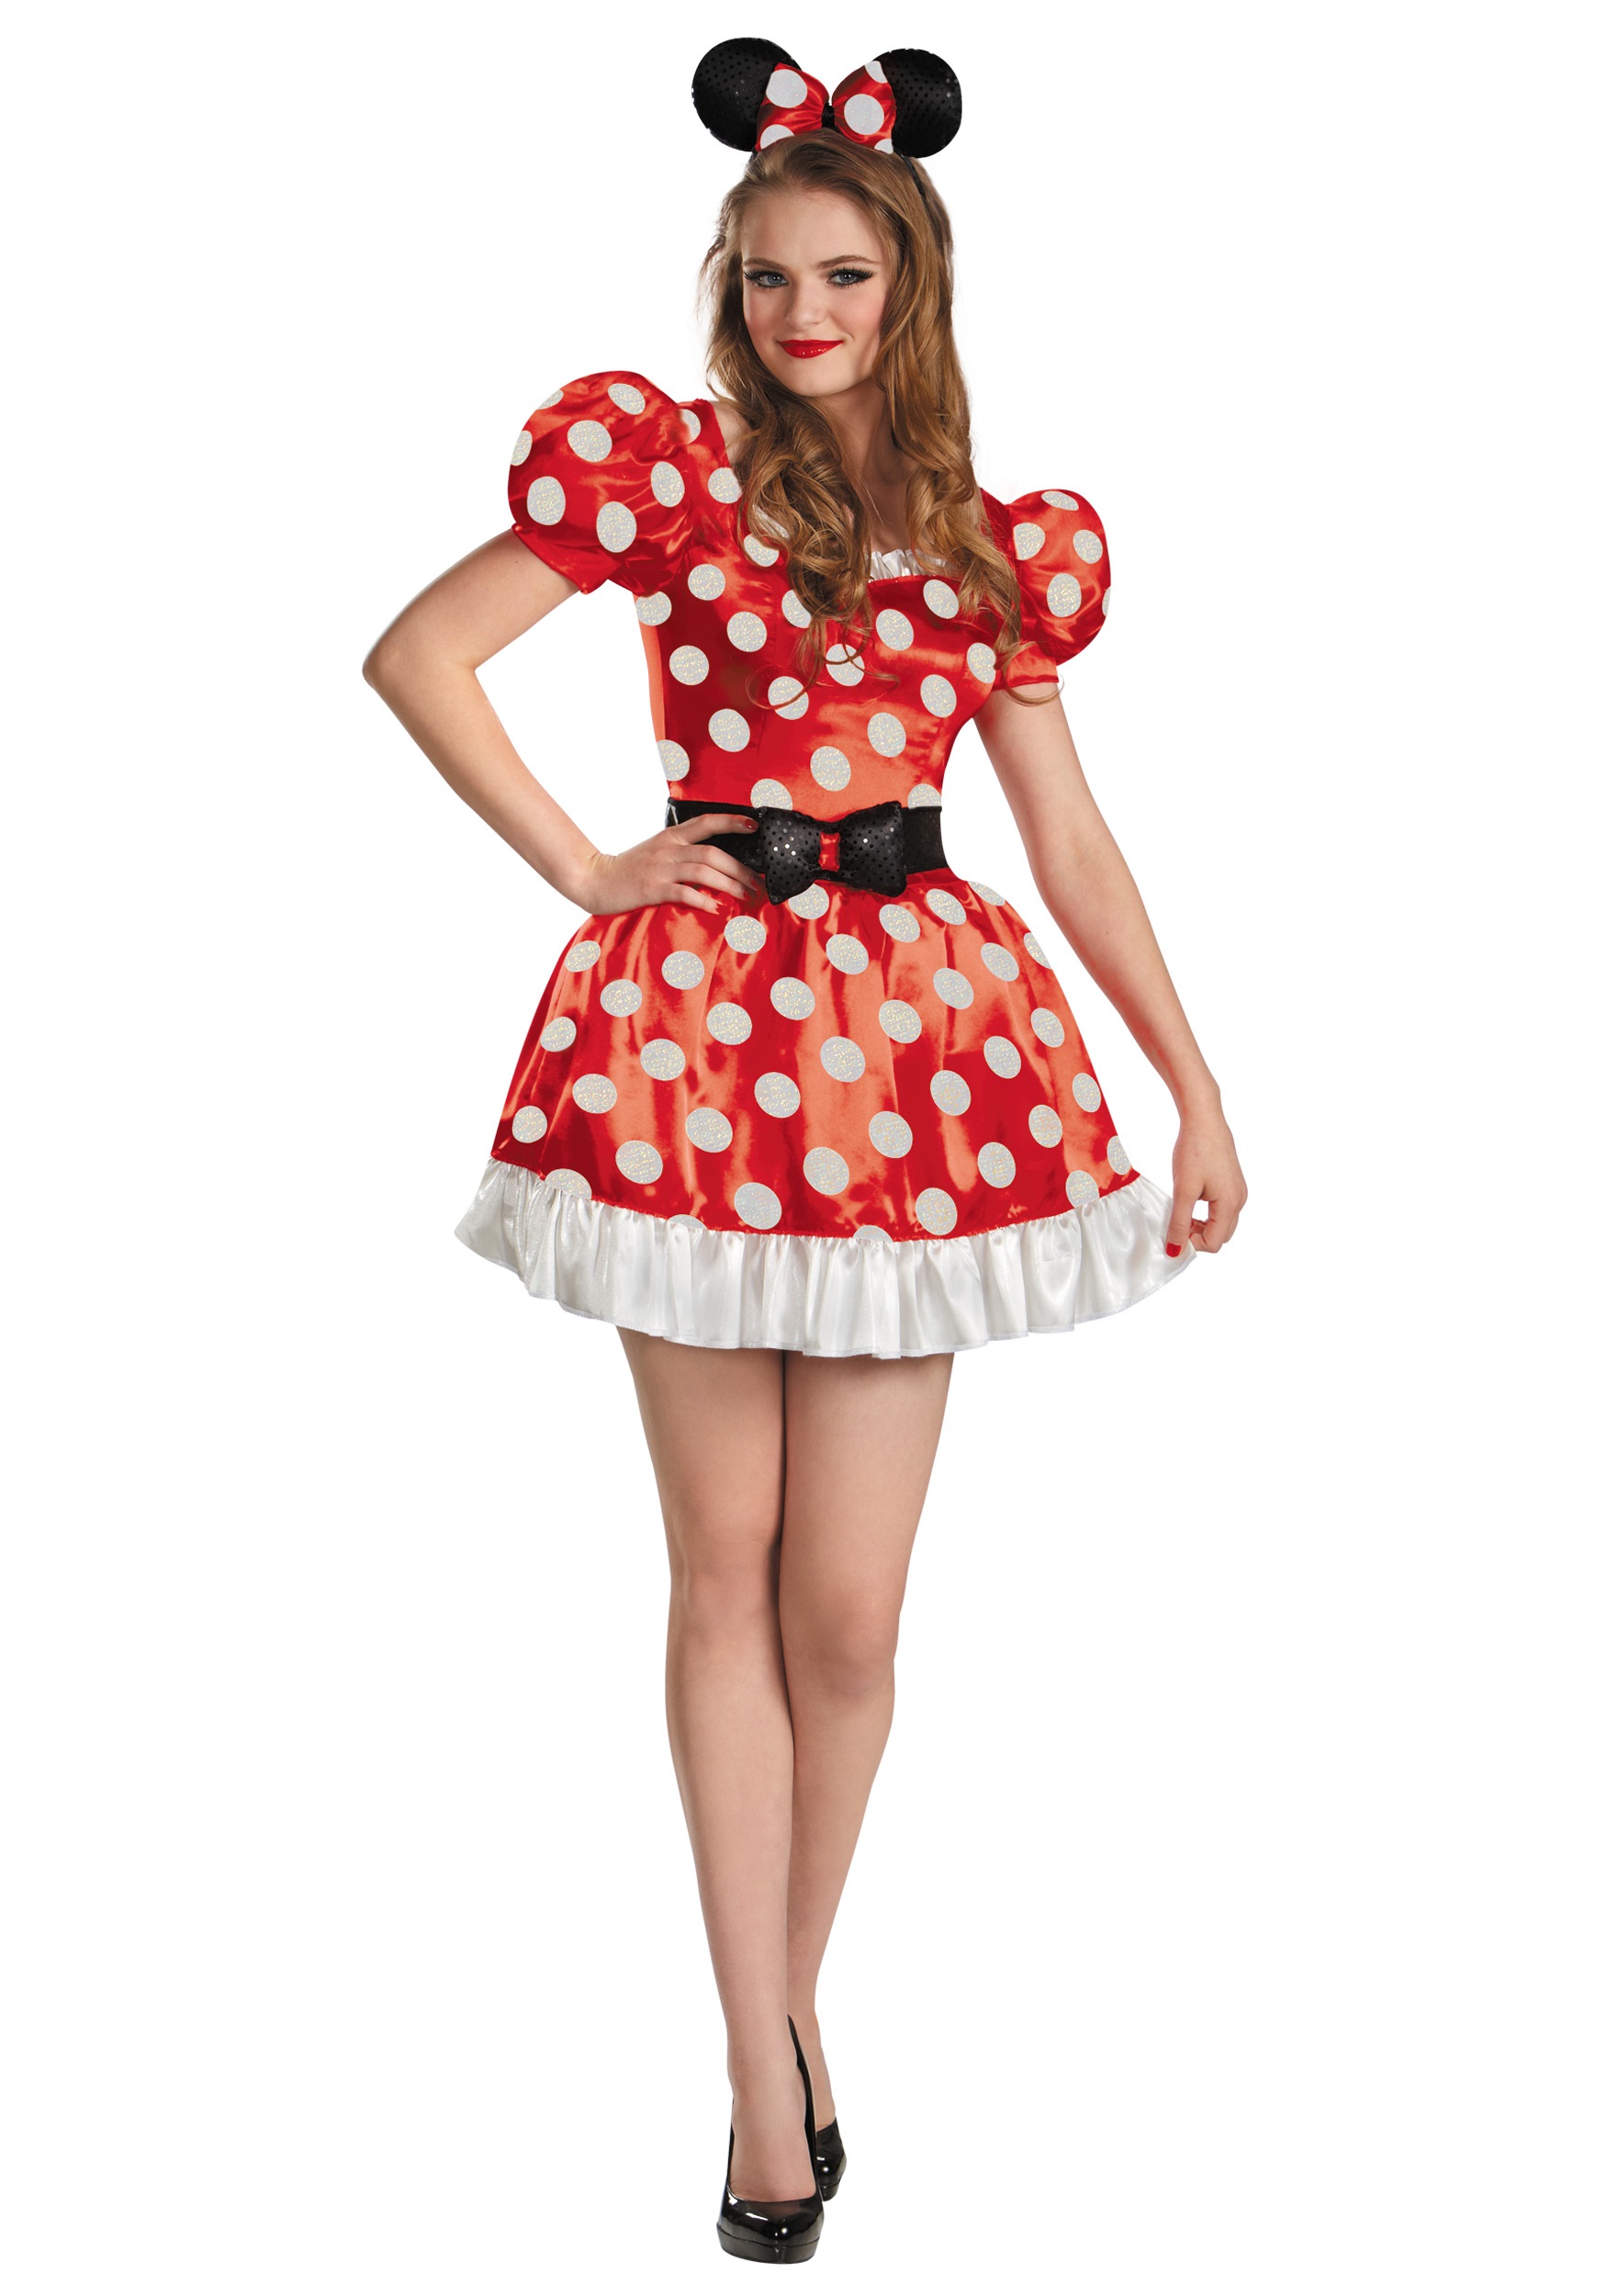 Photos - Fancy Dress Disney Disguise Adult  Classic Red Minnie Costume Dress |  Costumes B 